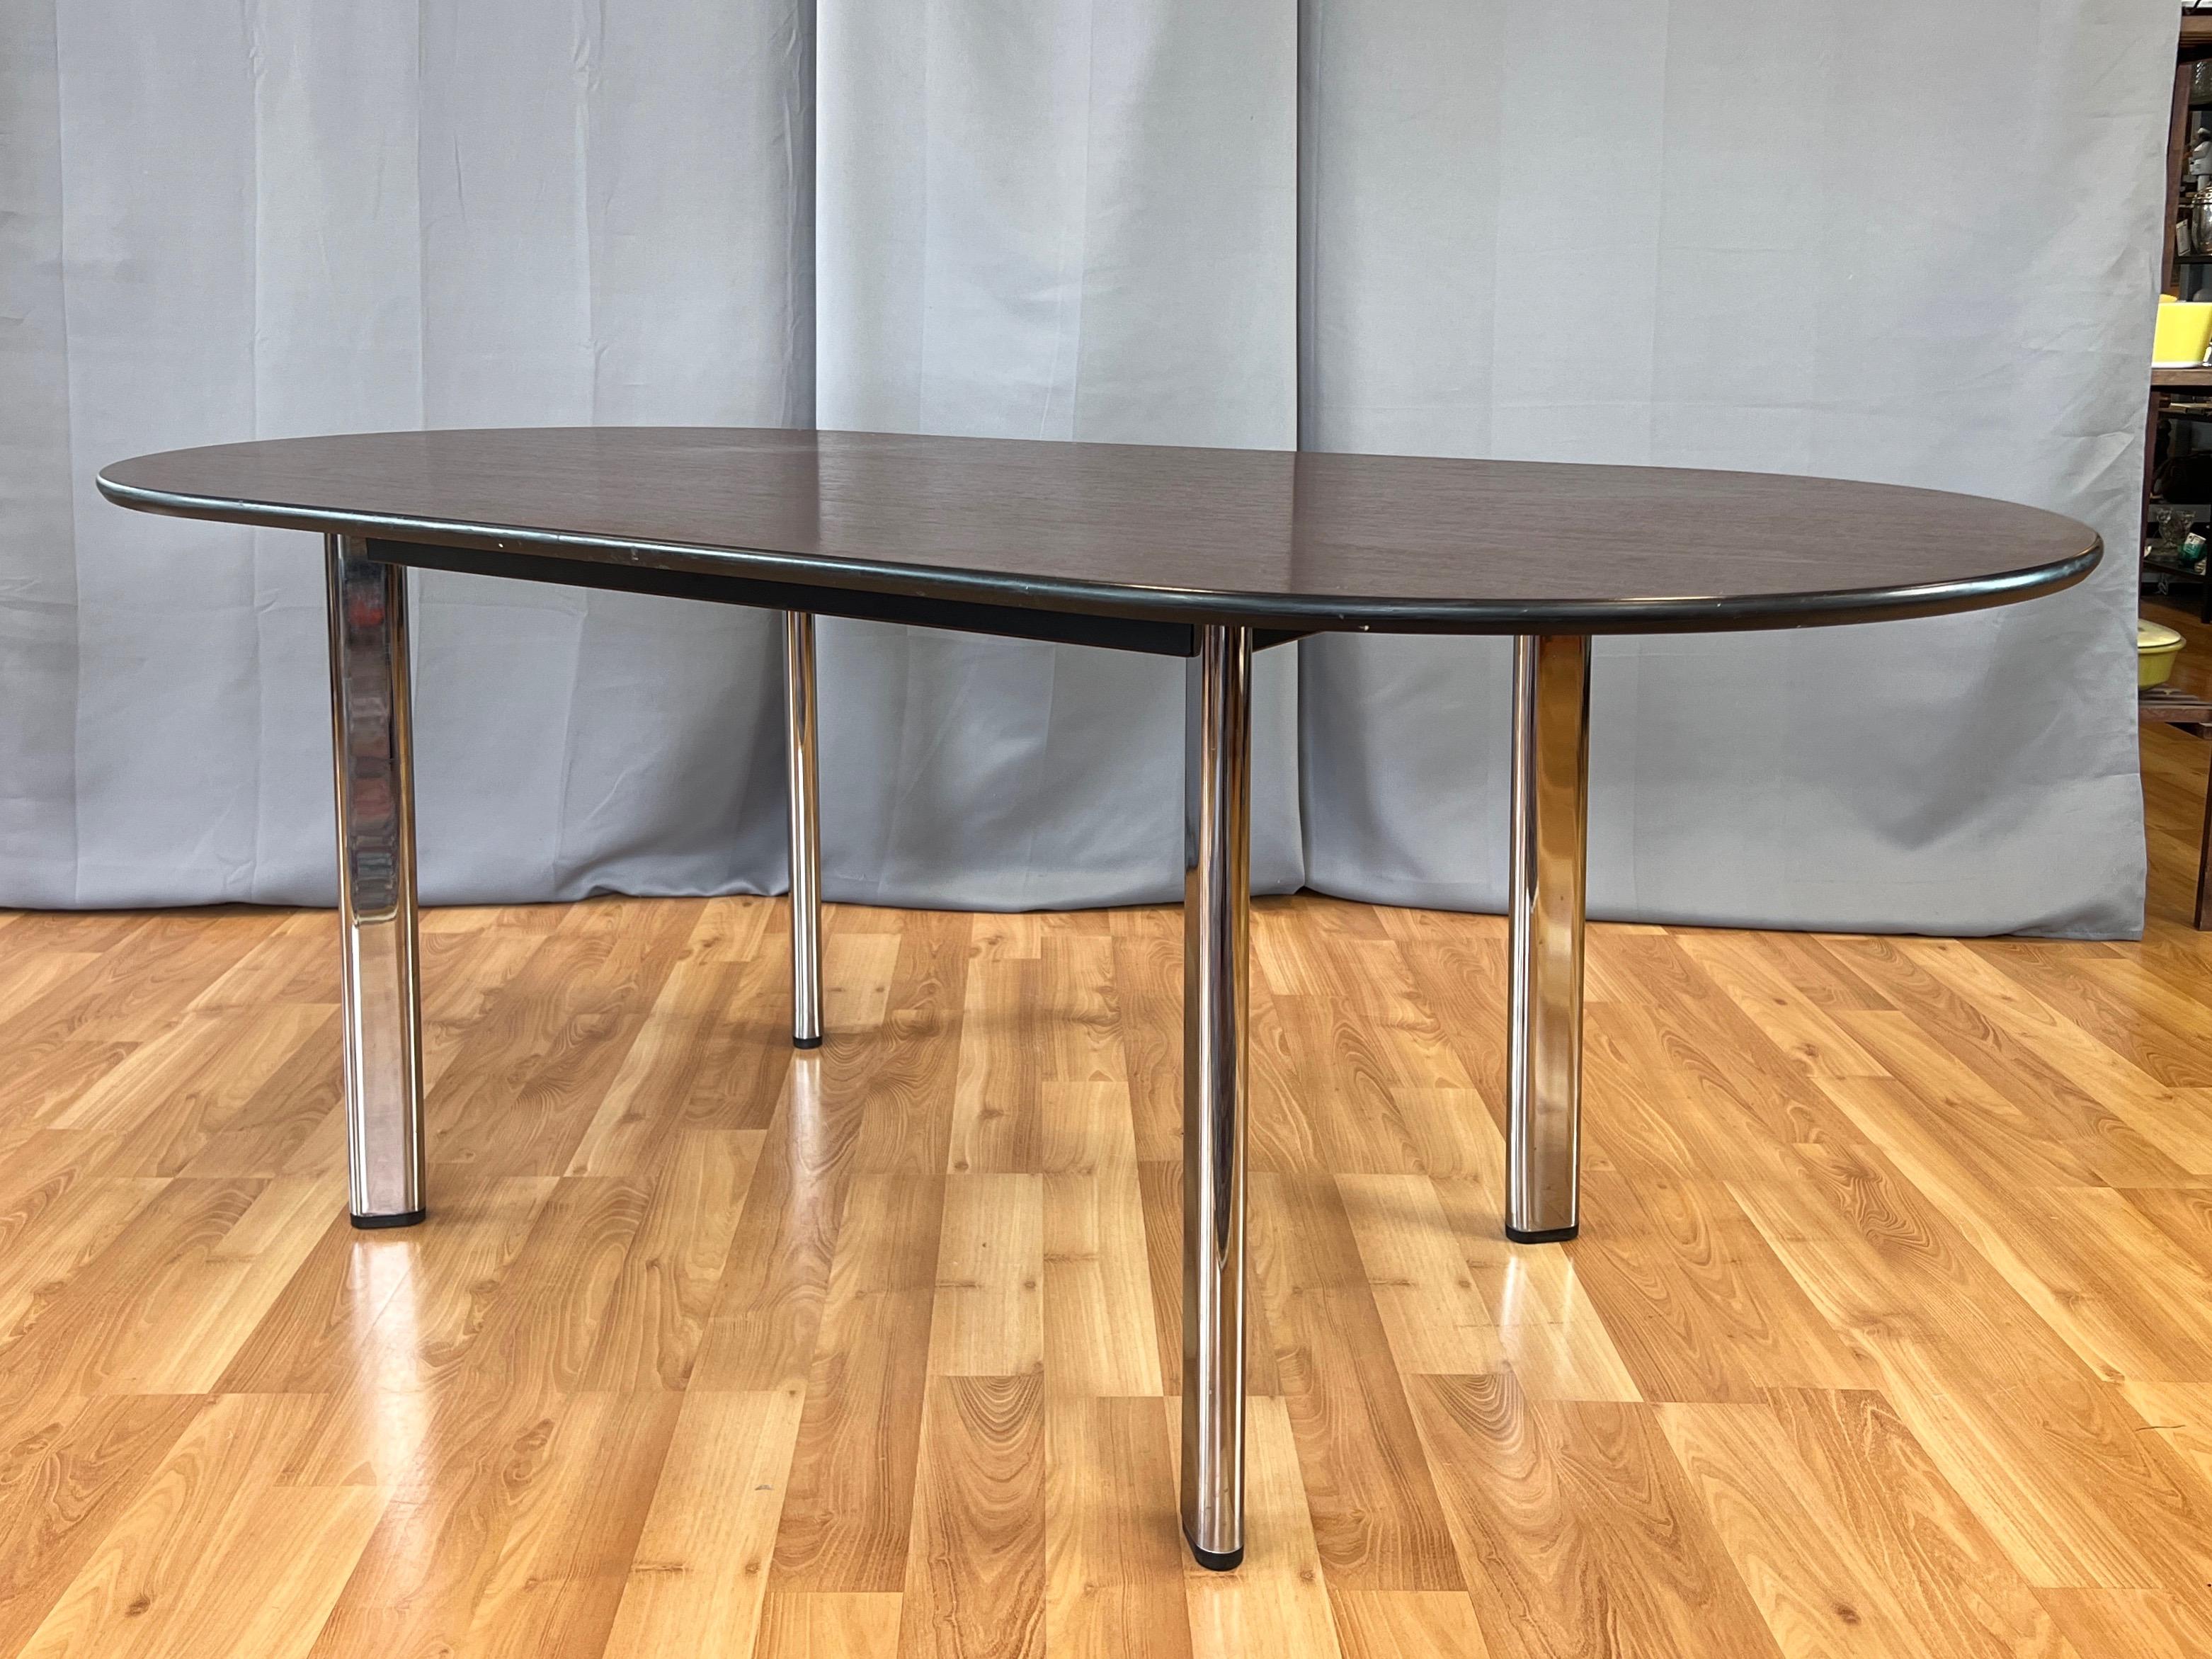 A 1995 production of designer Joe D’Urso’s minimalist 1980 High Table for Knoll with American cherry racetrack top and chrome legs.

Top features a handsome expanse of richly-hued and finely-grained American cherry veneer—darker in person than in